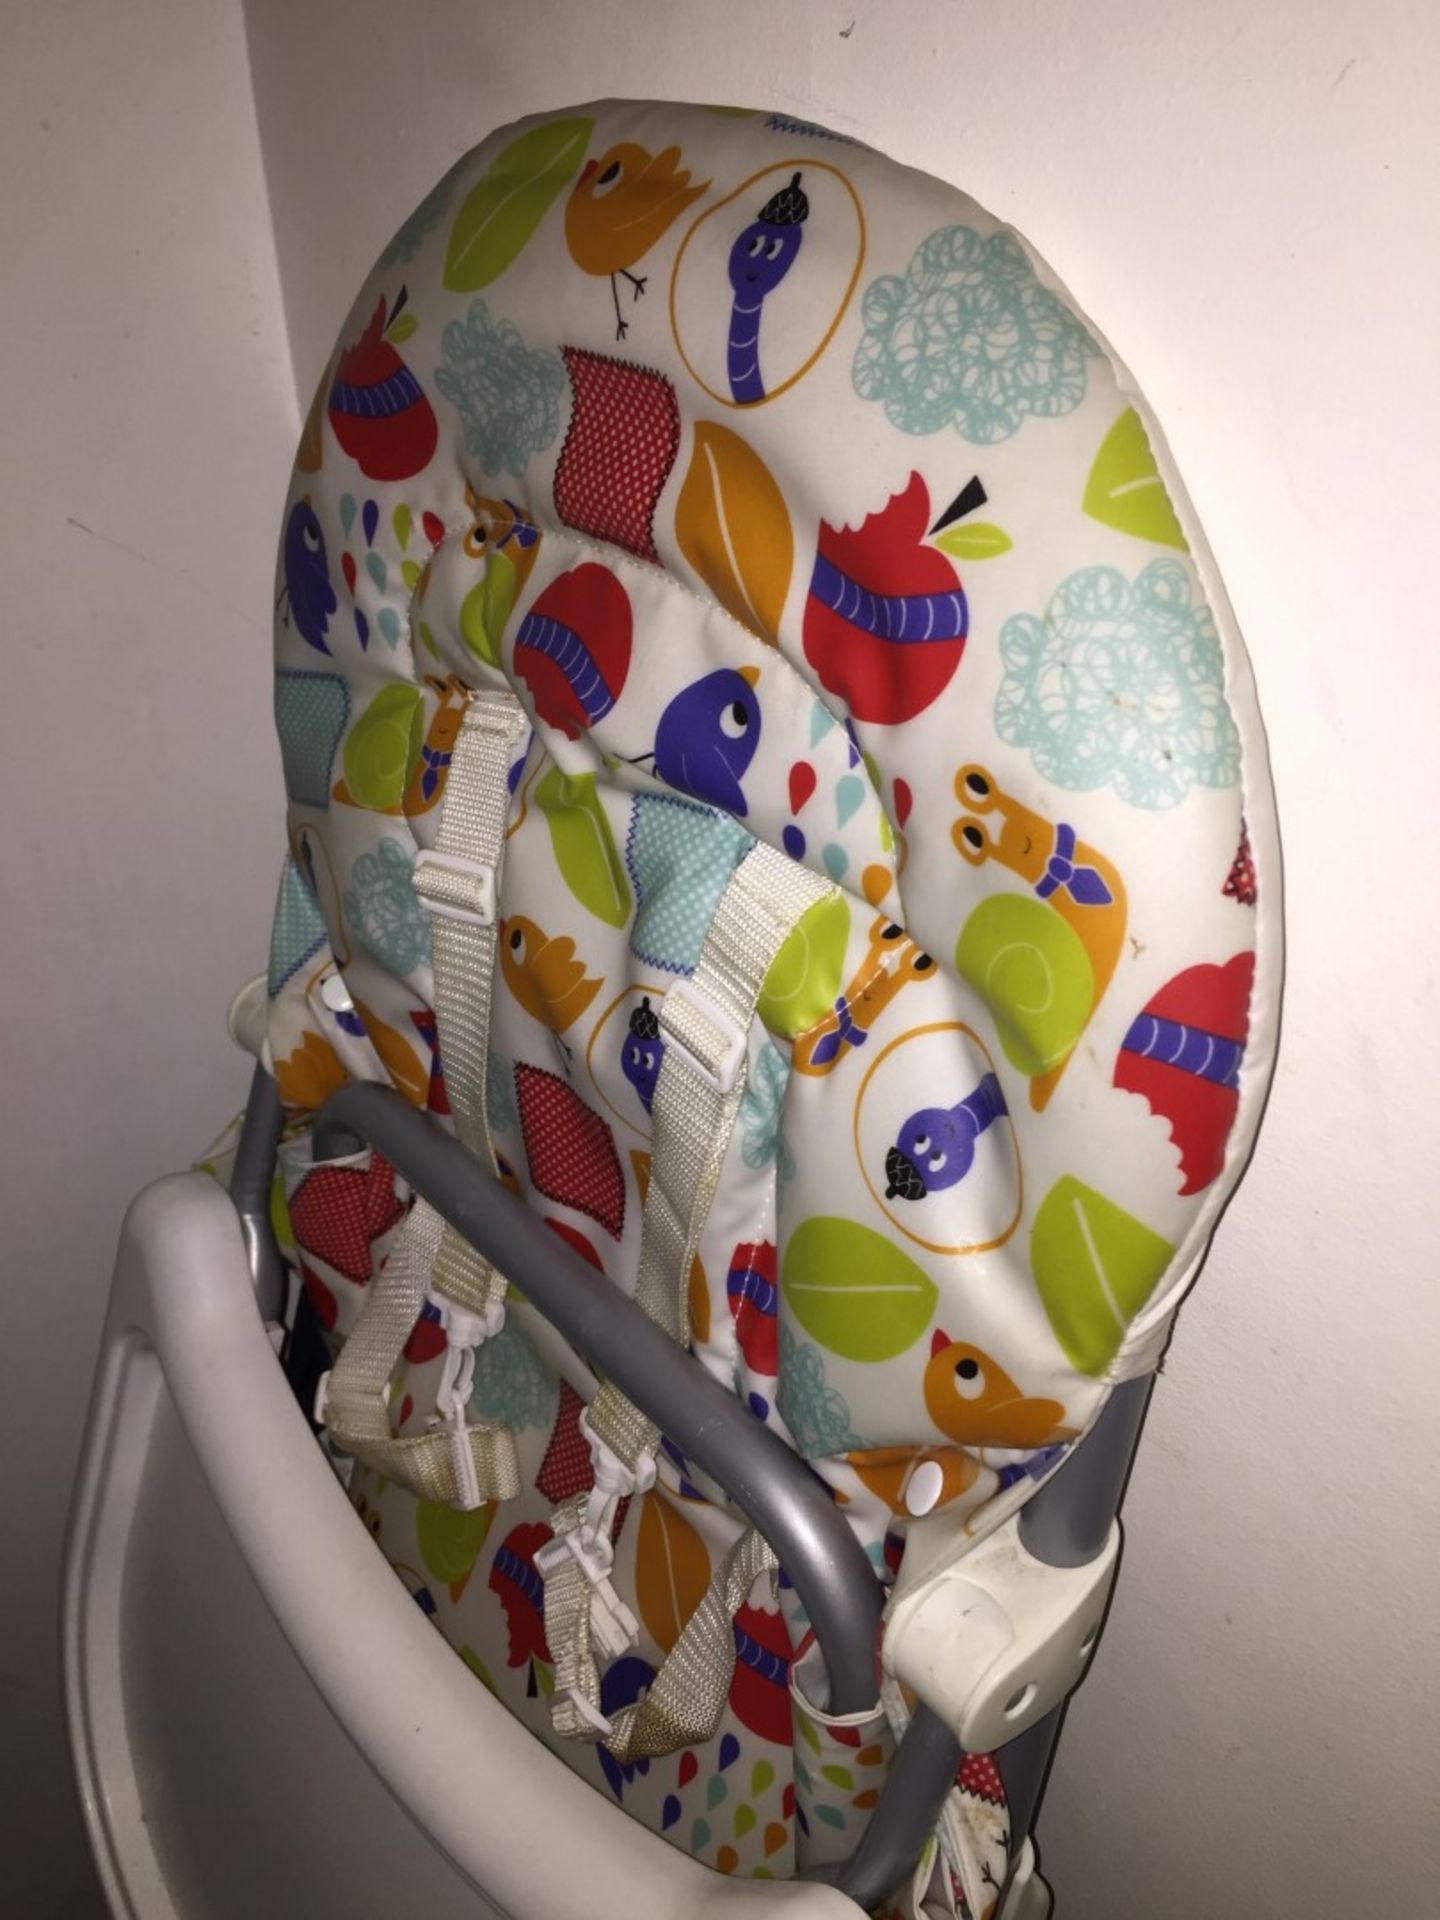 2 x Childrens High Chairs - Foldable High Chairs With Eating Trays - CL188 - Ref GF7 - Location: - Image 2 of 3